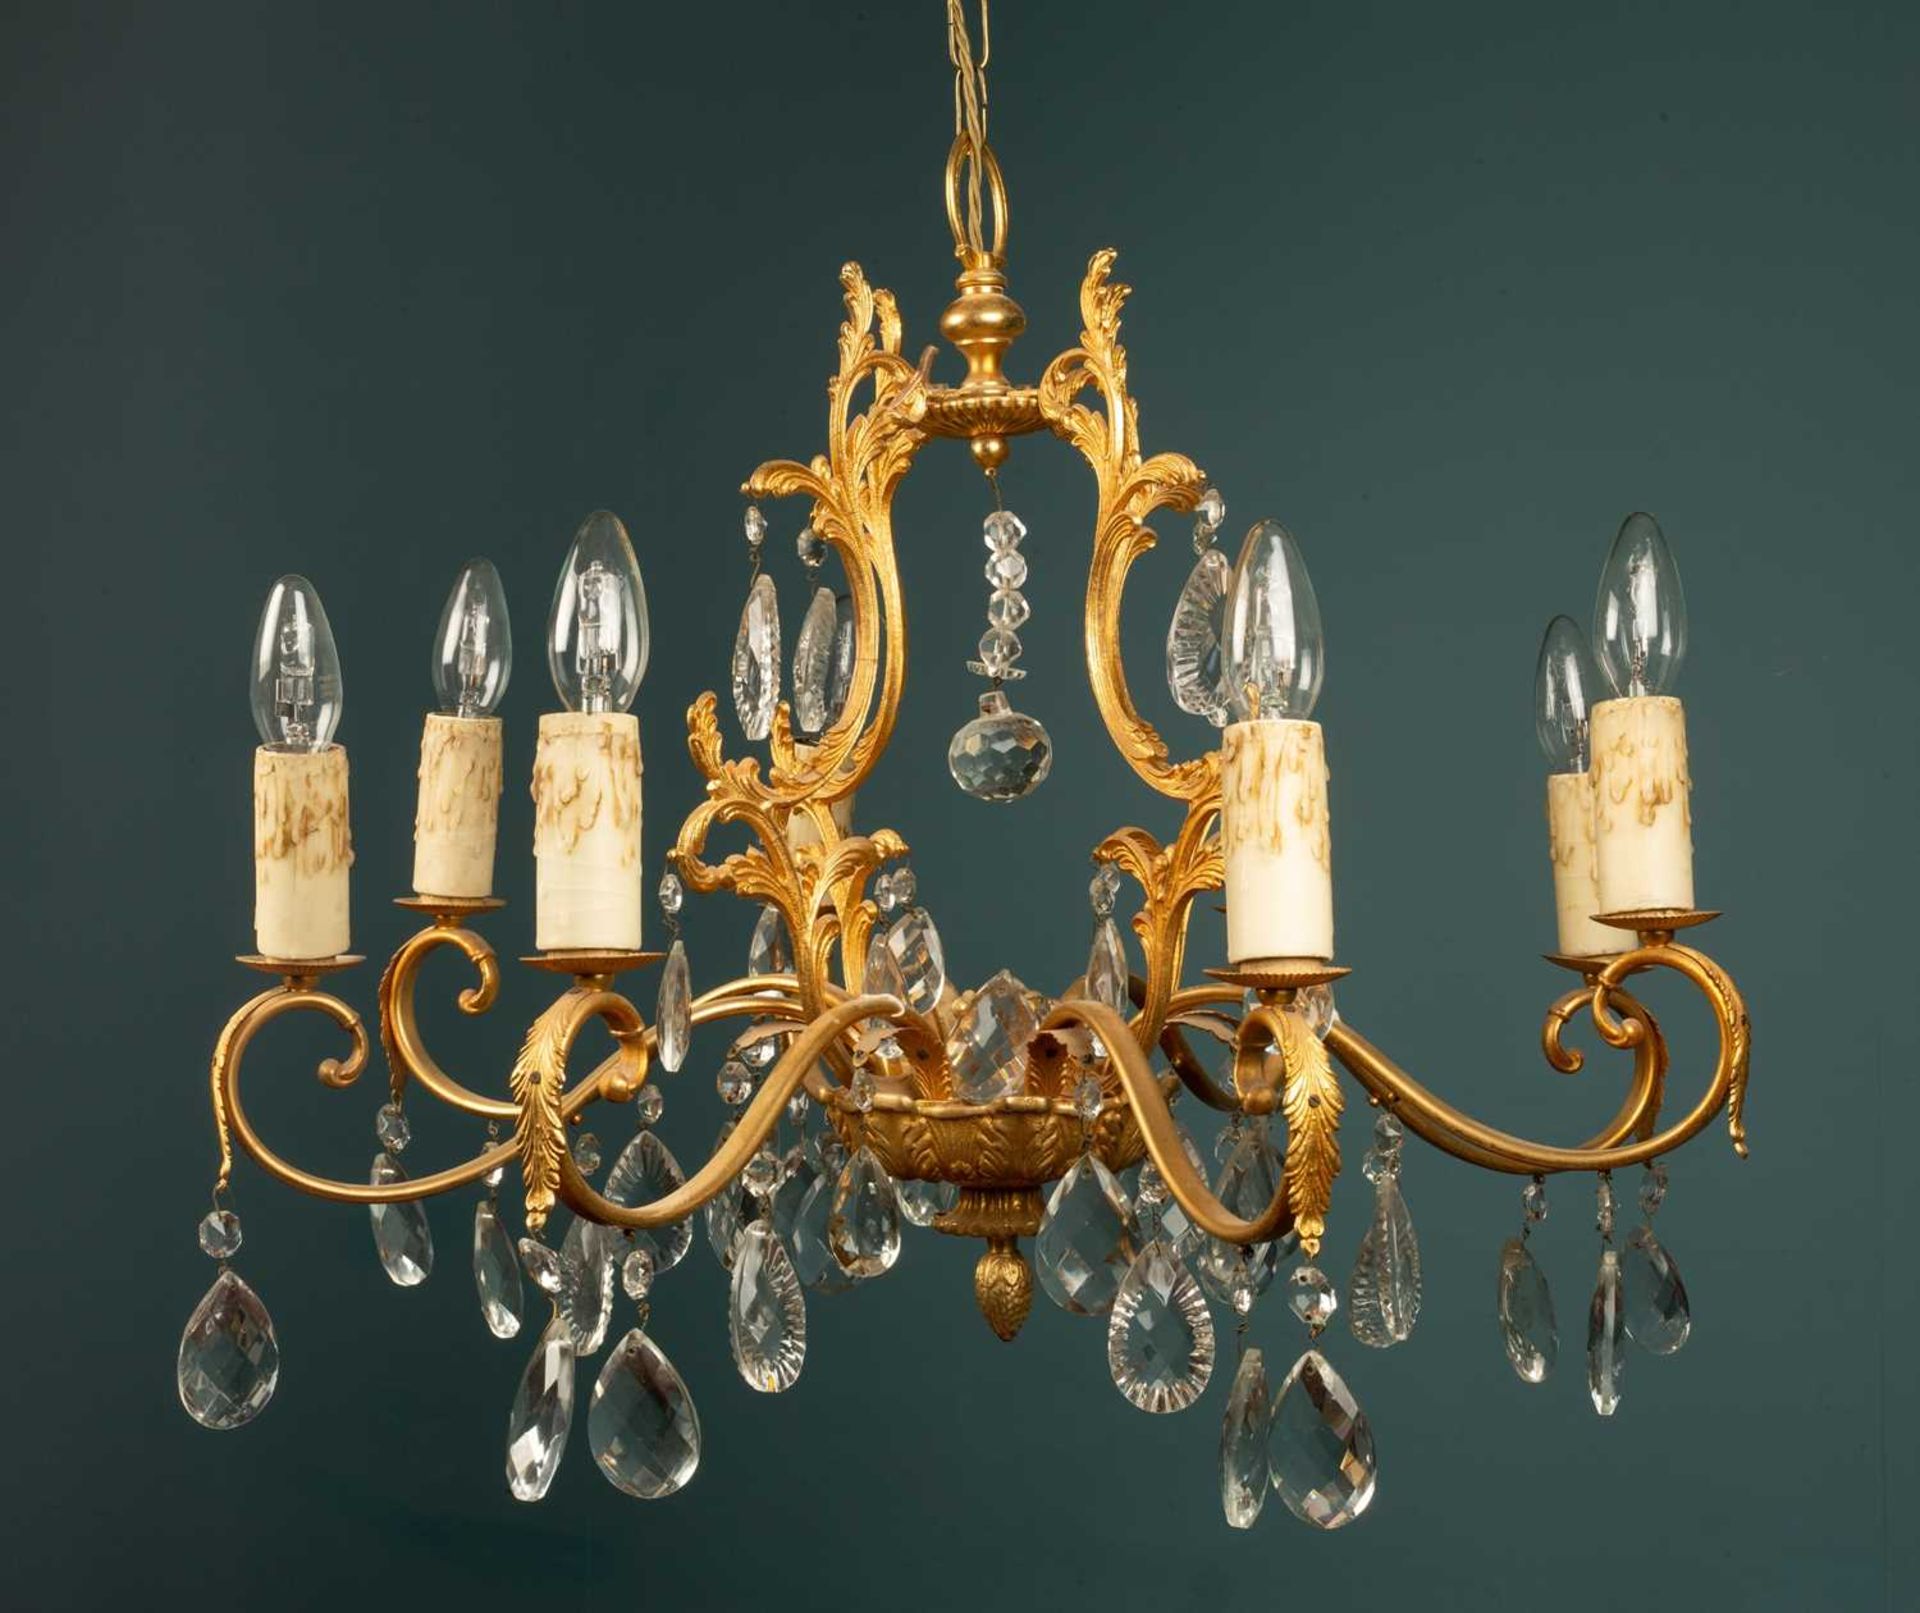 A French style brass eight-branch electrolier or chandelier